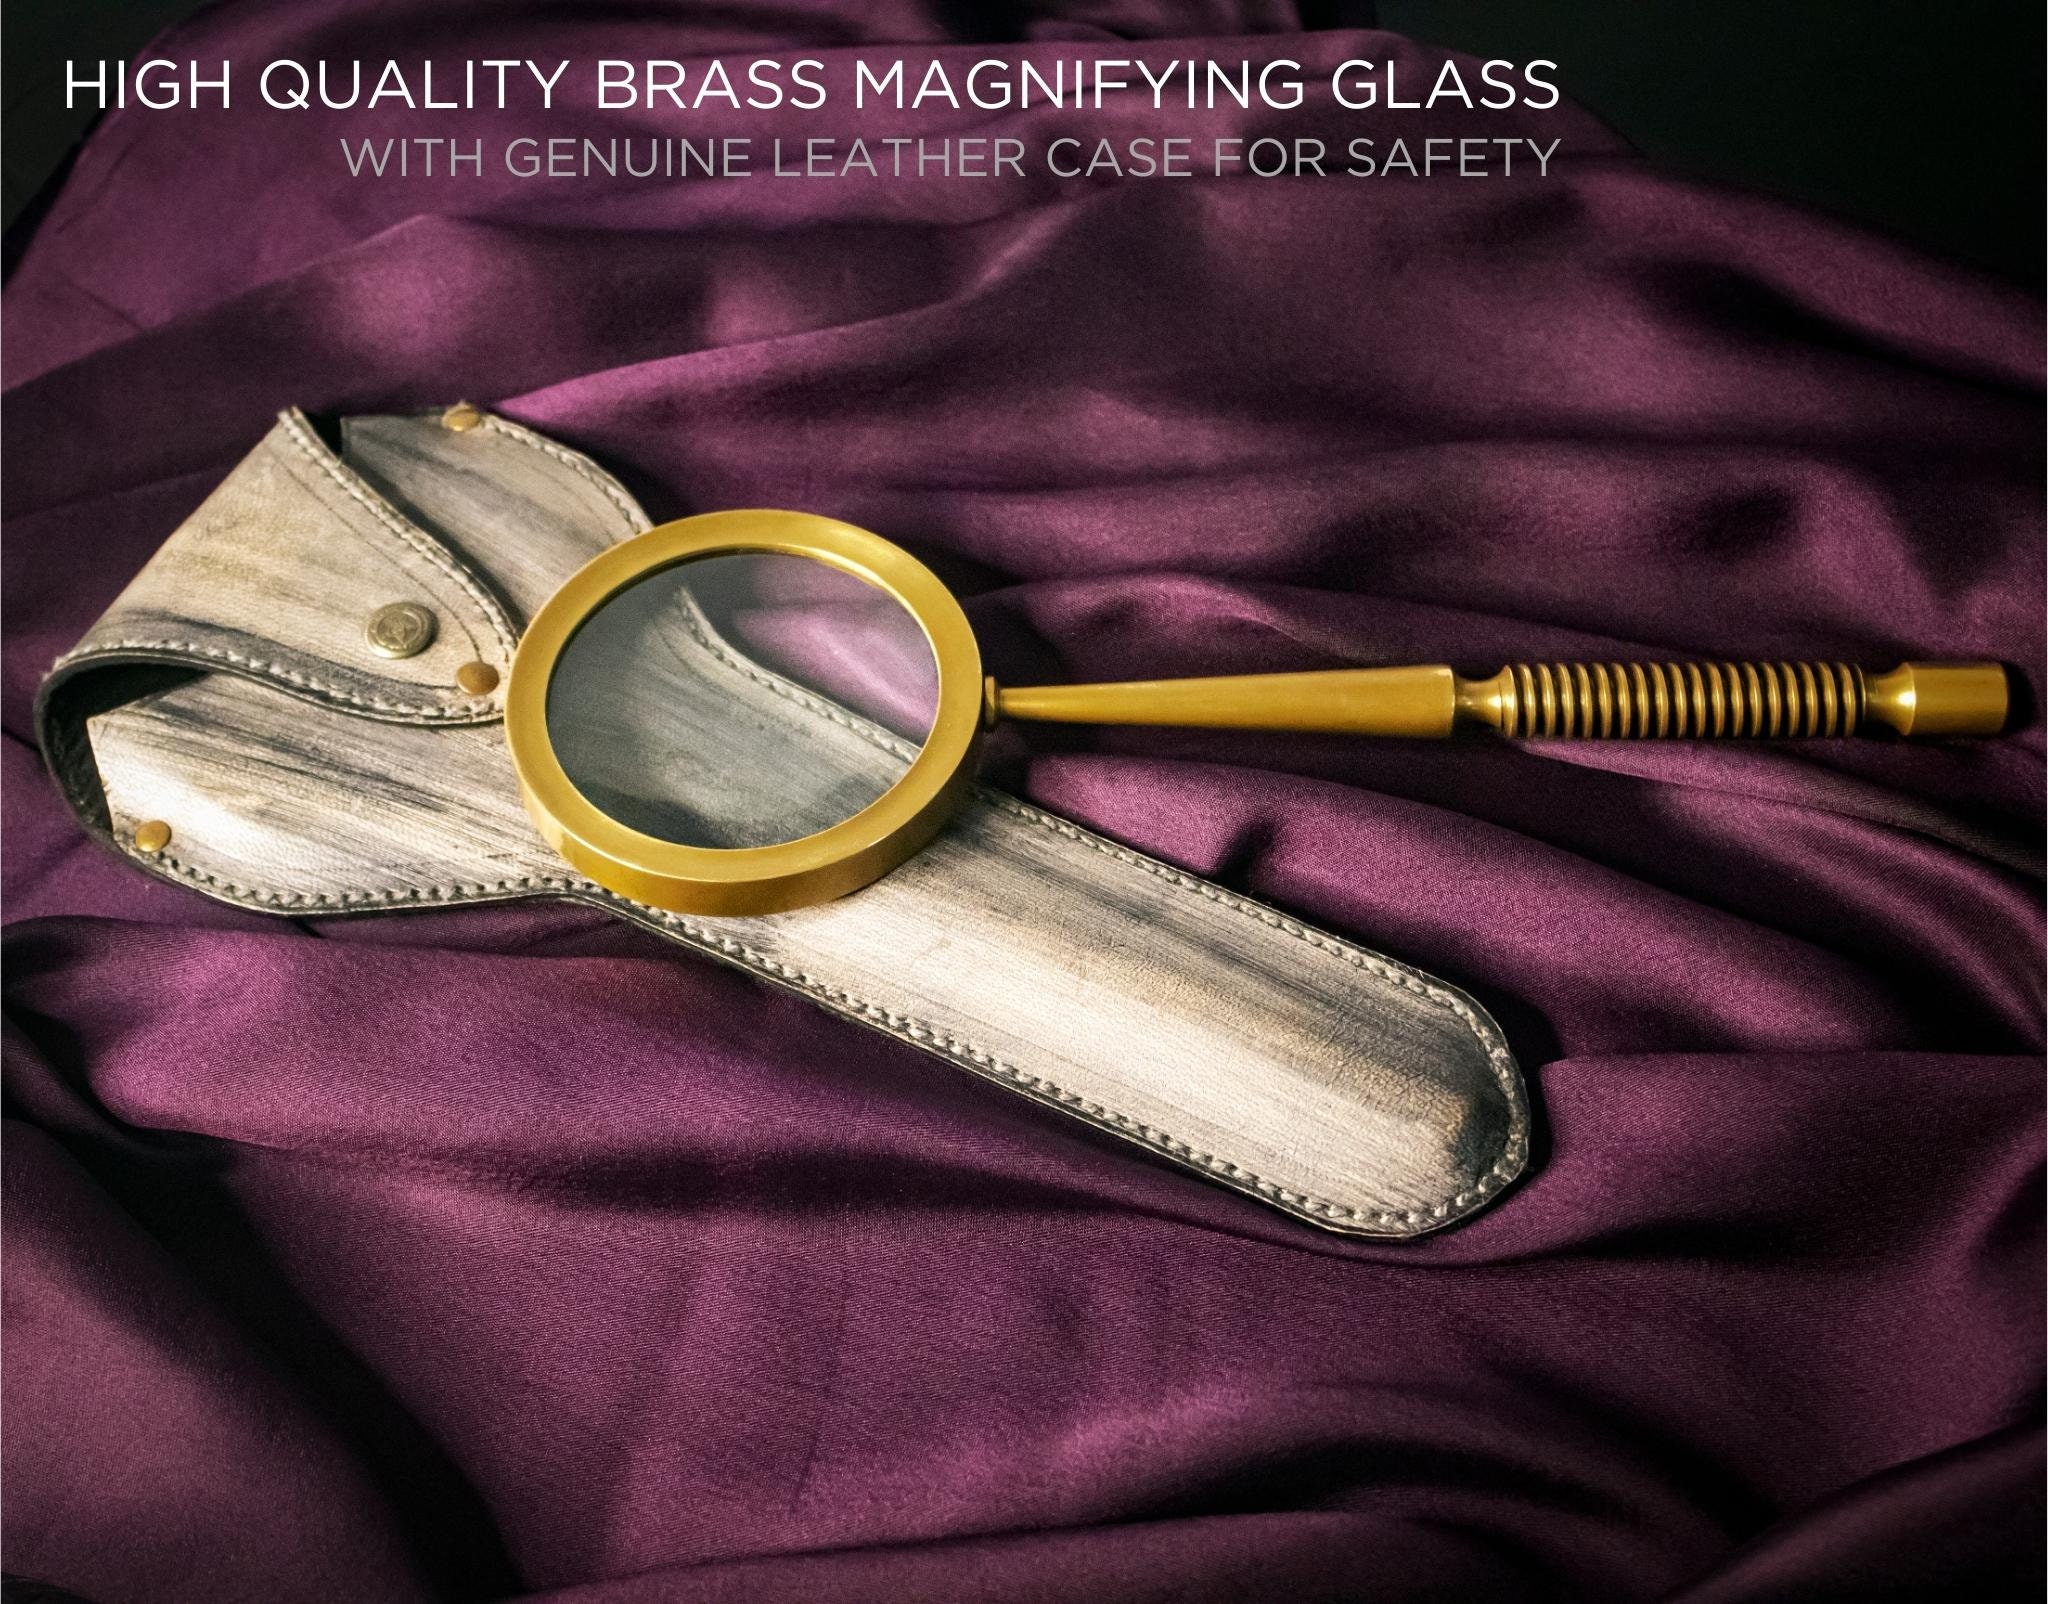 Magnifying Glasses for Reading, High Magnification One Power Magnifier Readers (5.50)